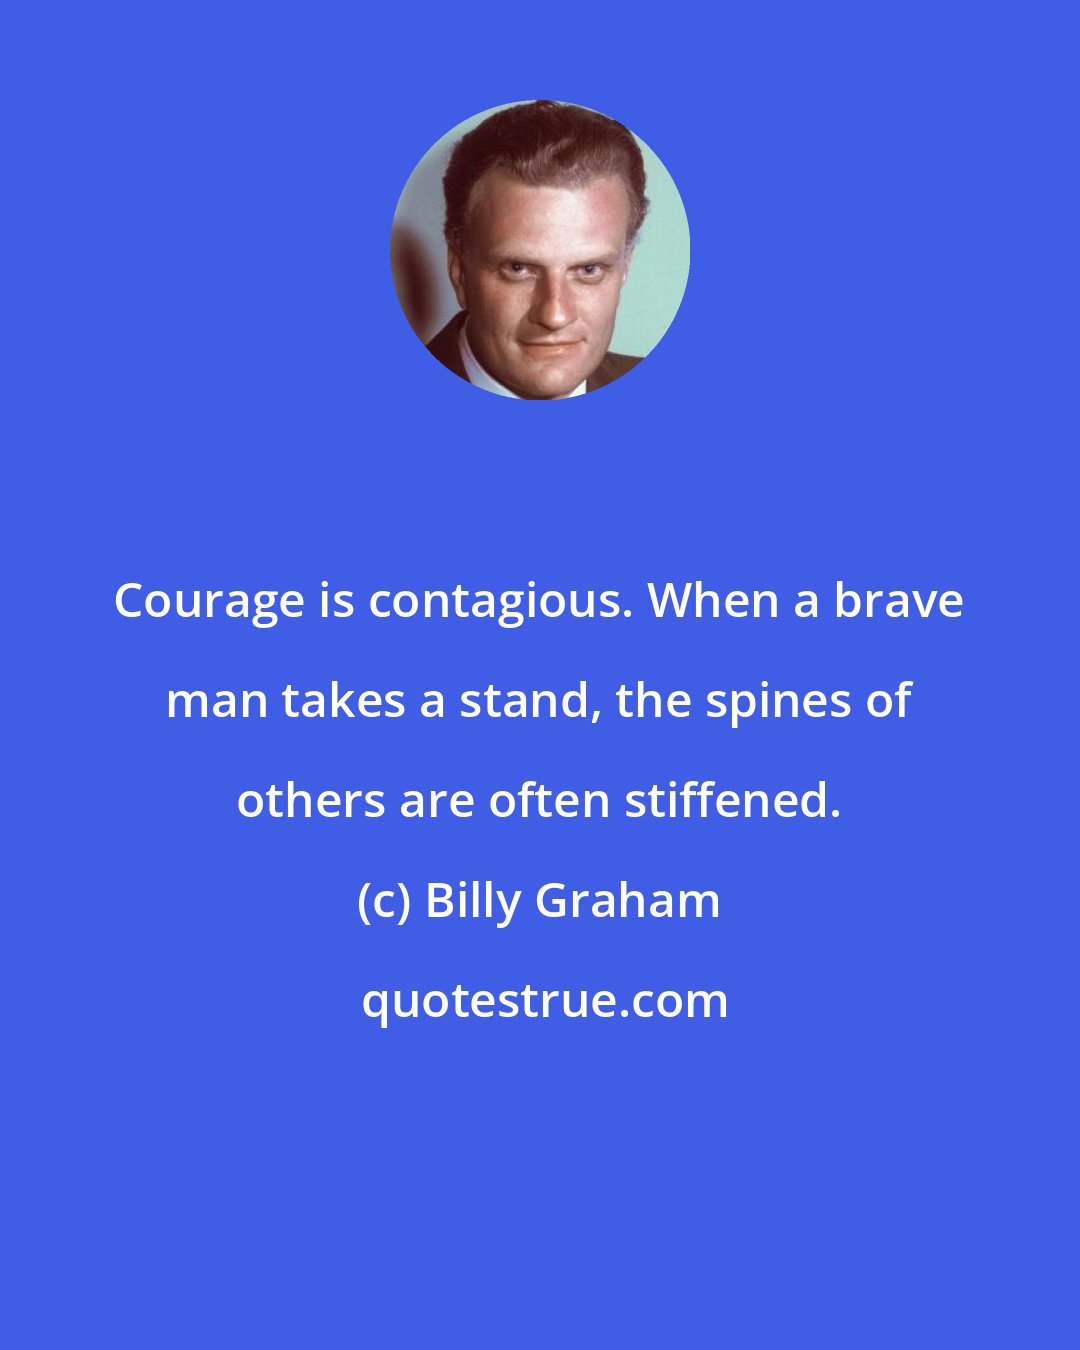 Billy Graham: Courage is contagious. When a brave man takes a stand, the spines of others are often stiffened.